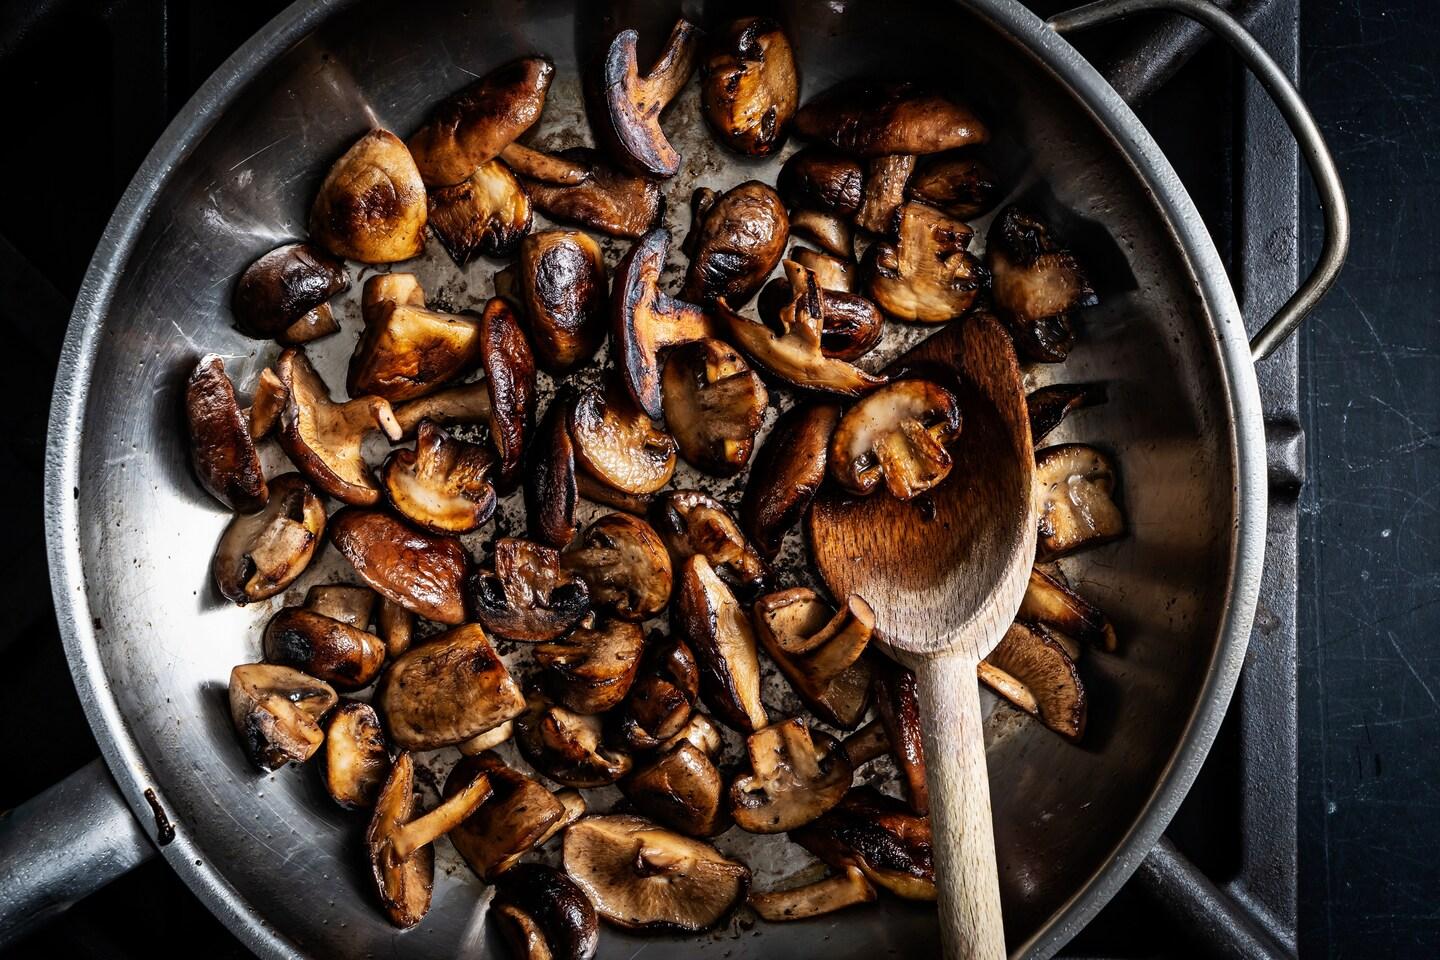 The key to beautifully browned mushrooms